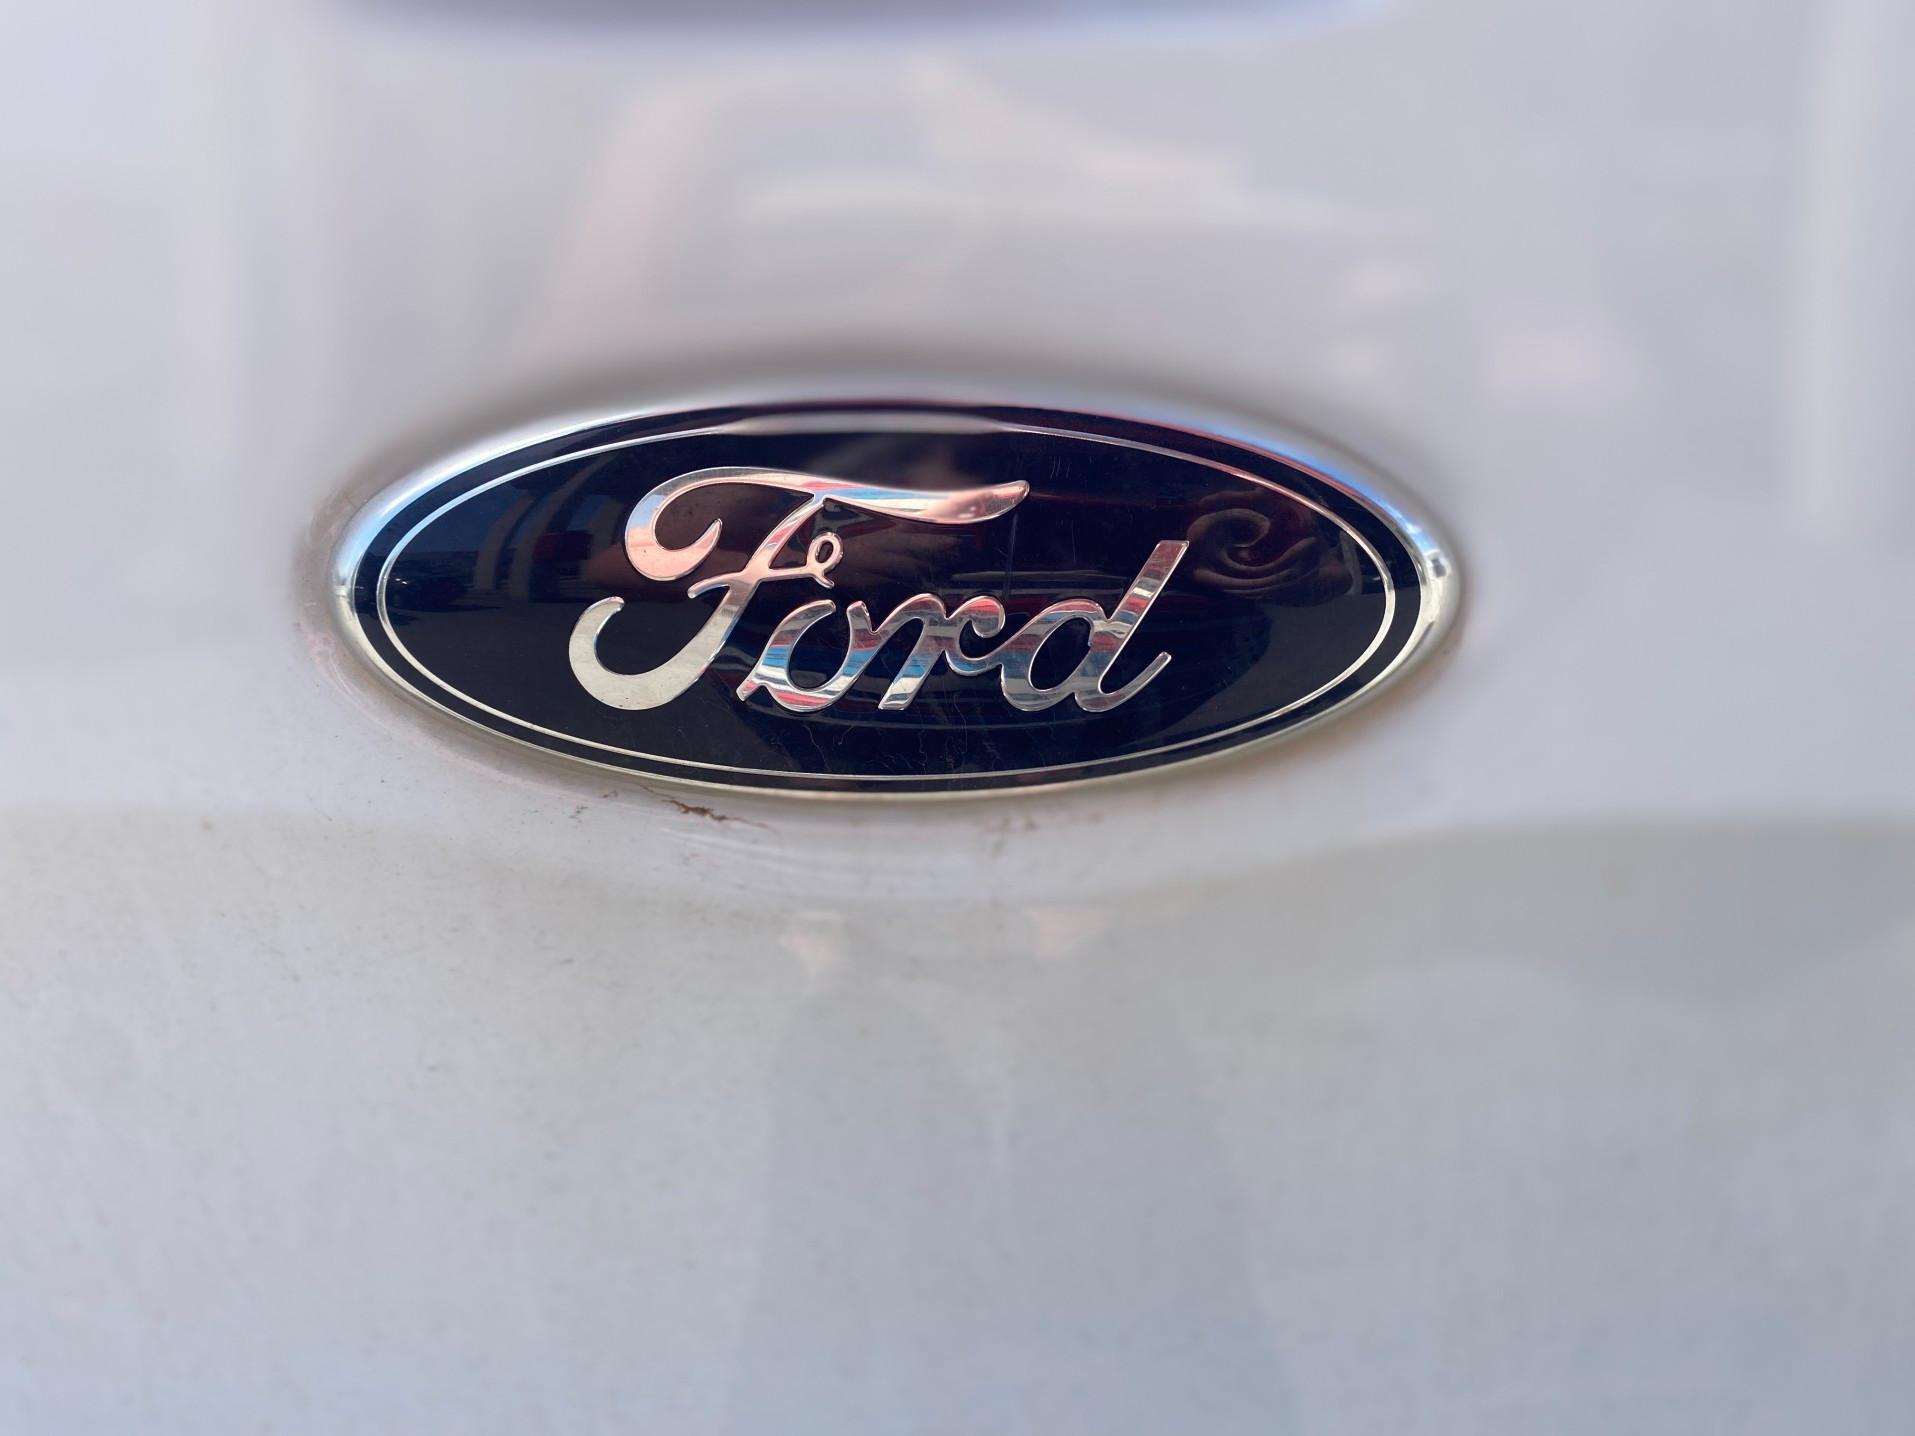 A Ford logo on the back of a white car.